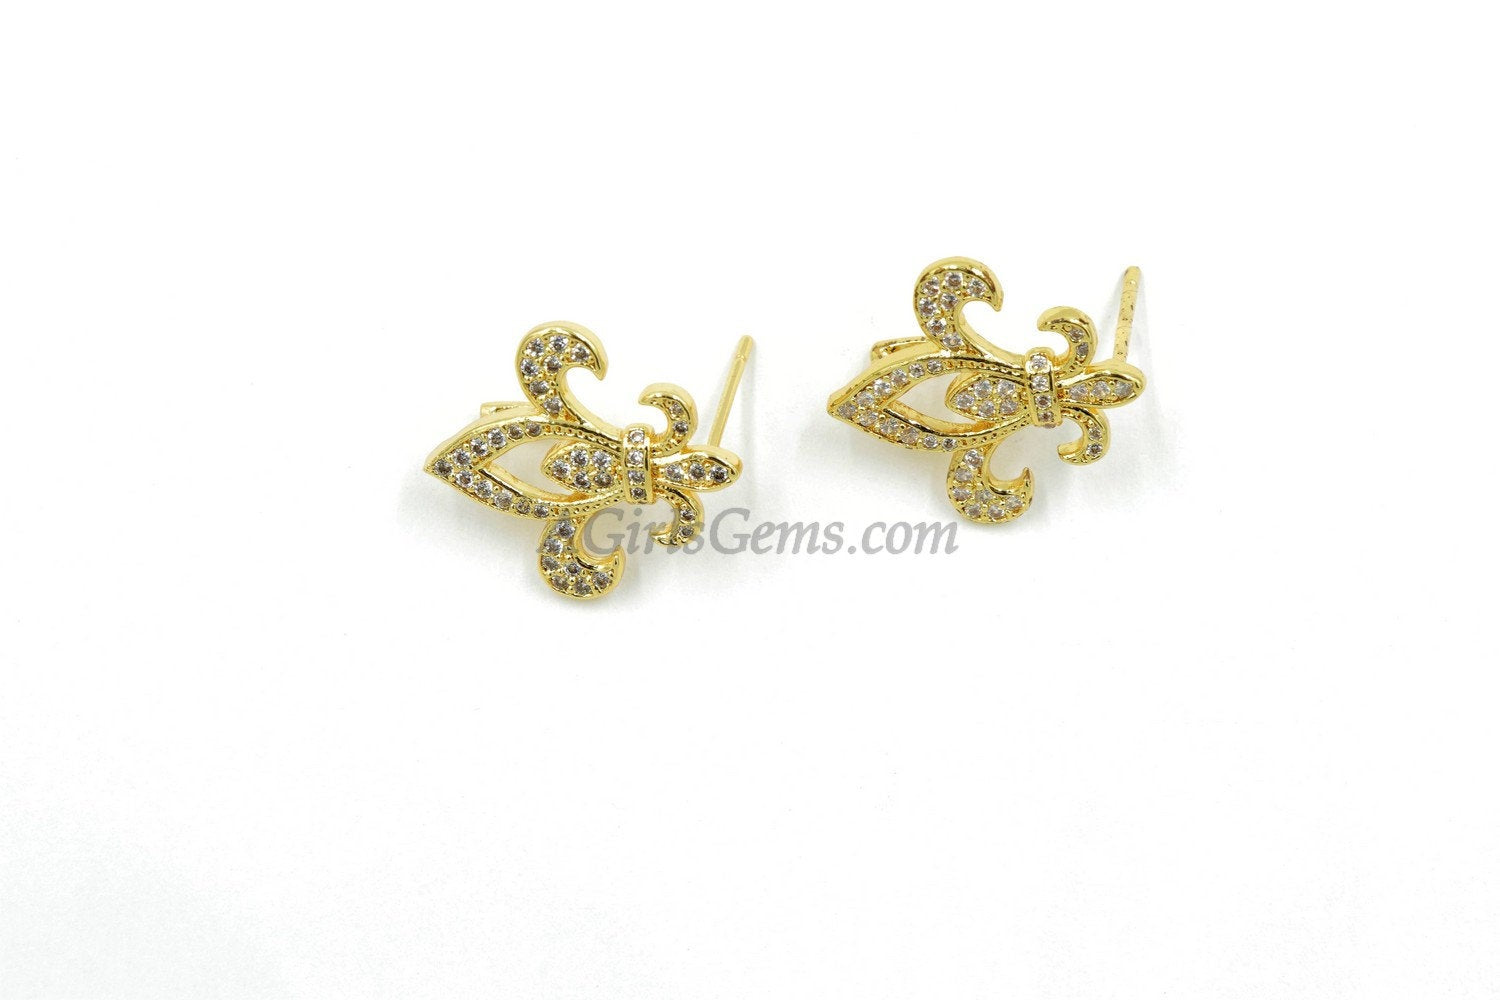 French Flower Post Earrings with Loop - A Girls Gems